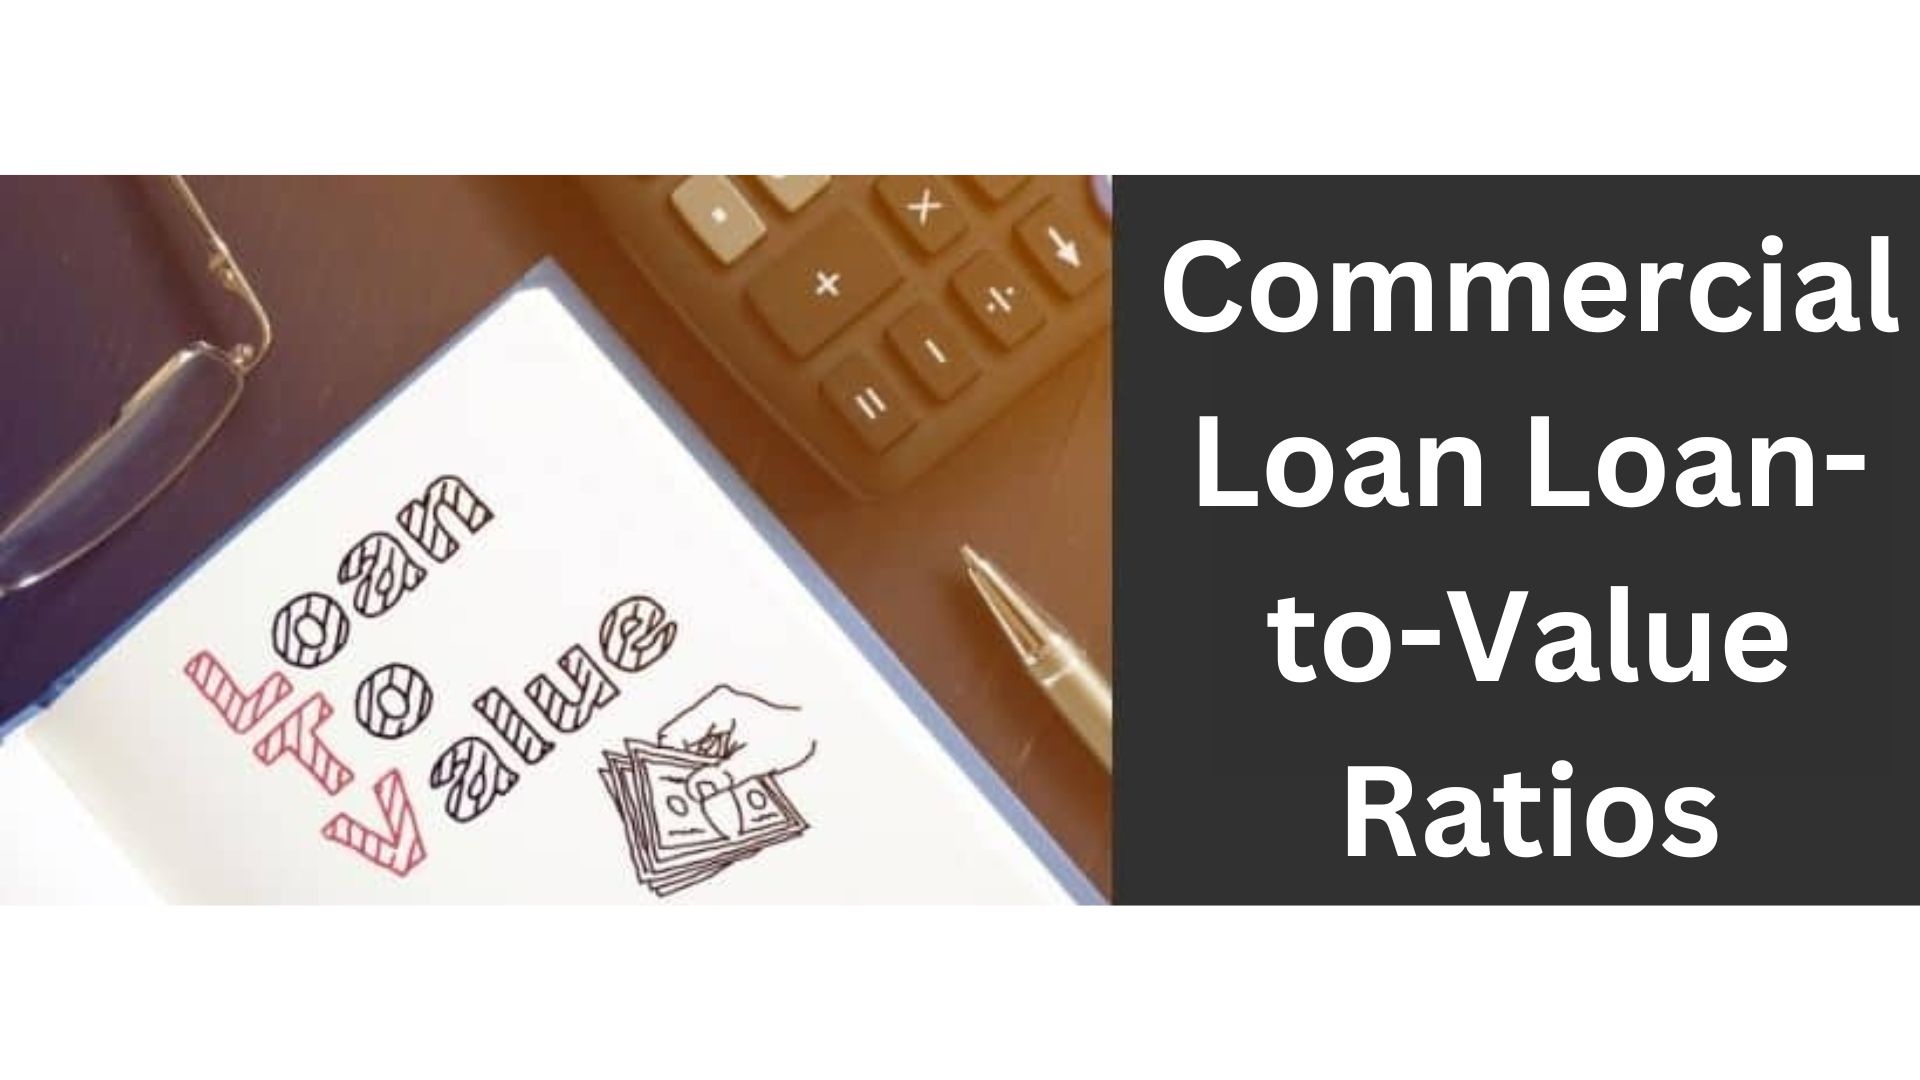 Commercial Loan Loan-to-Value Ratios